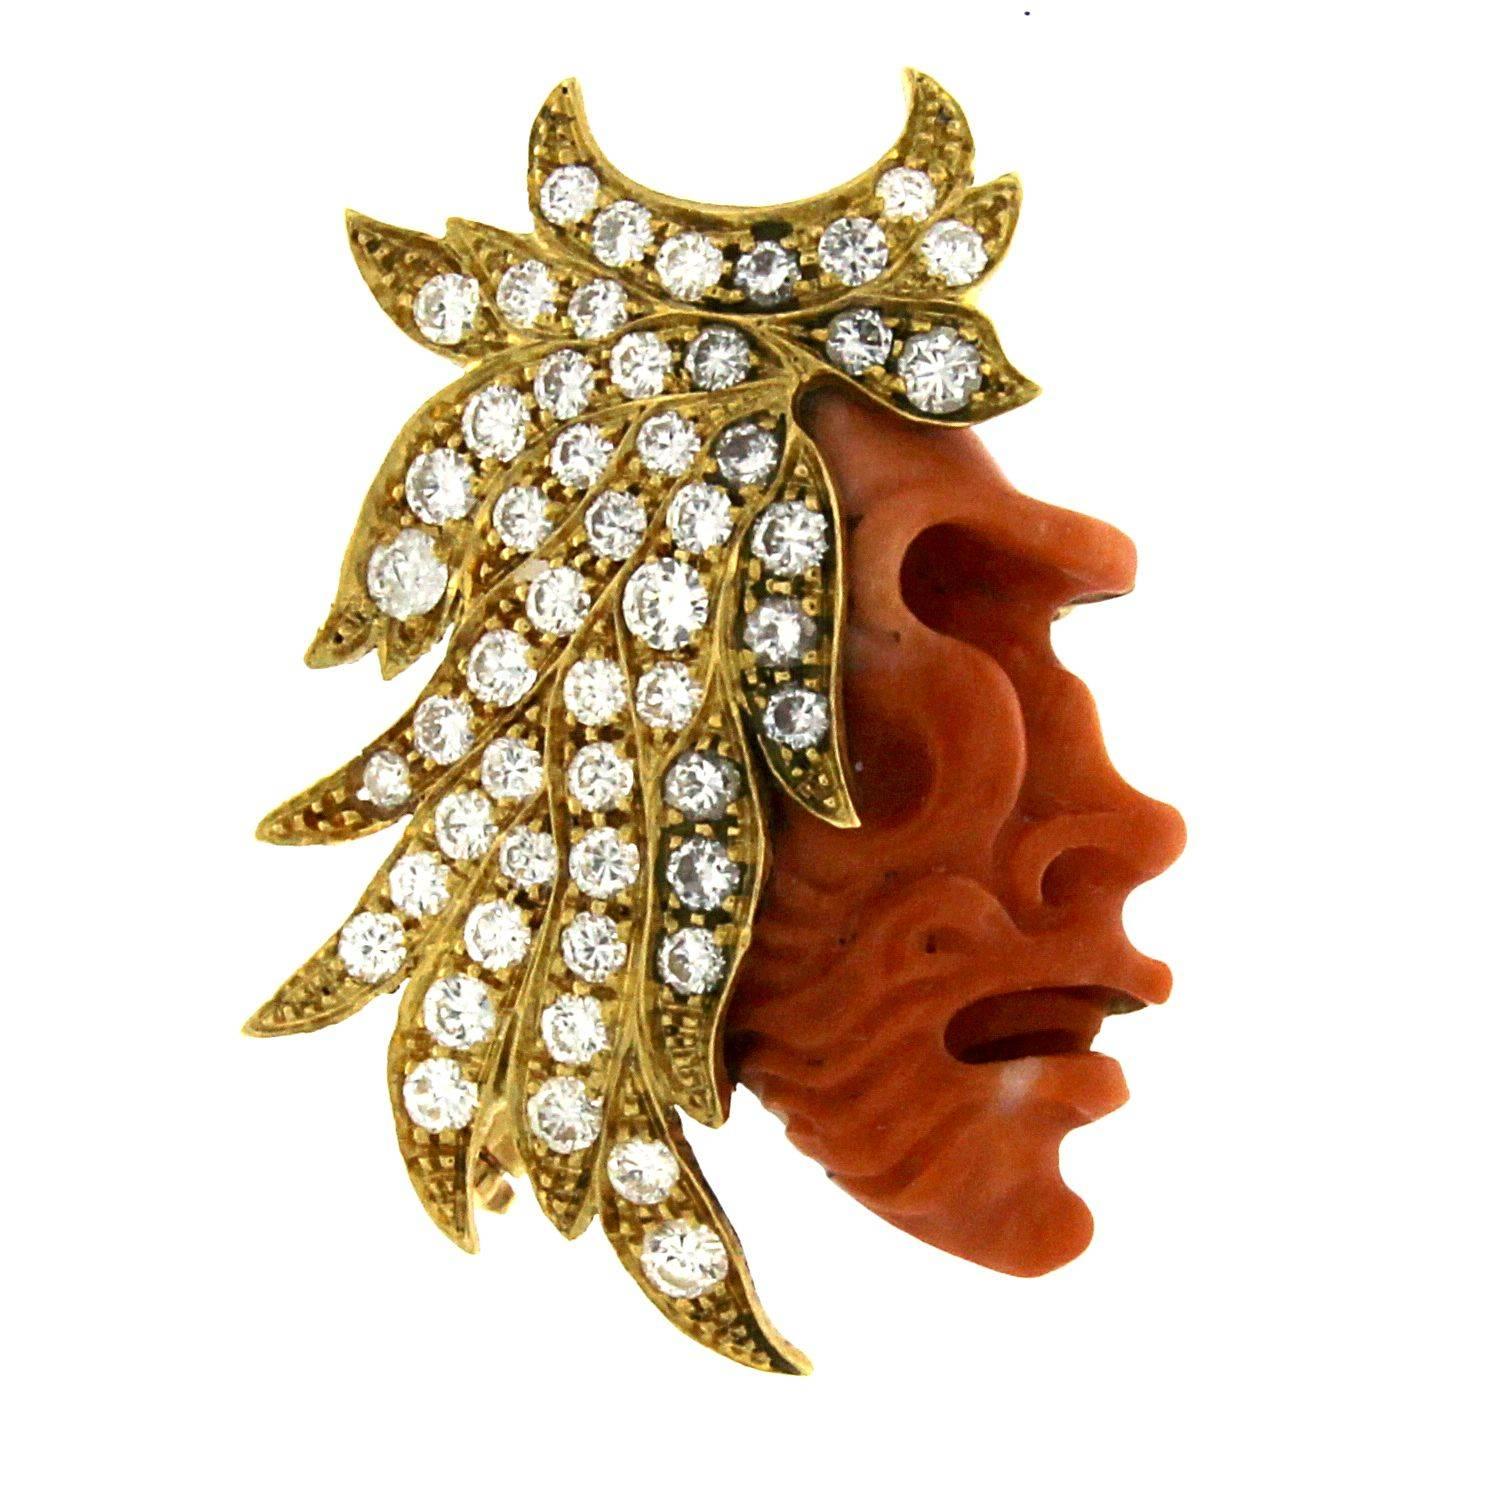 Exquisite Coral Face and Foliage Sculpture in 18k gold with Diamonds